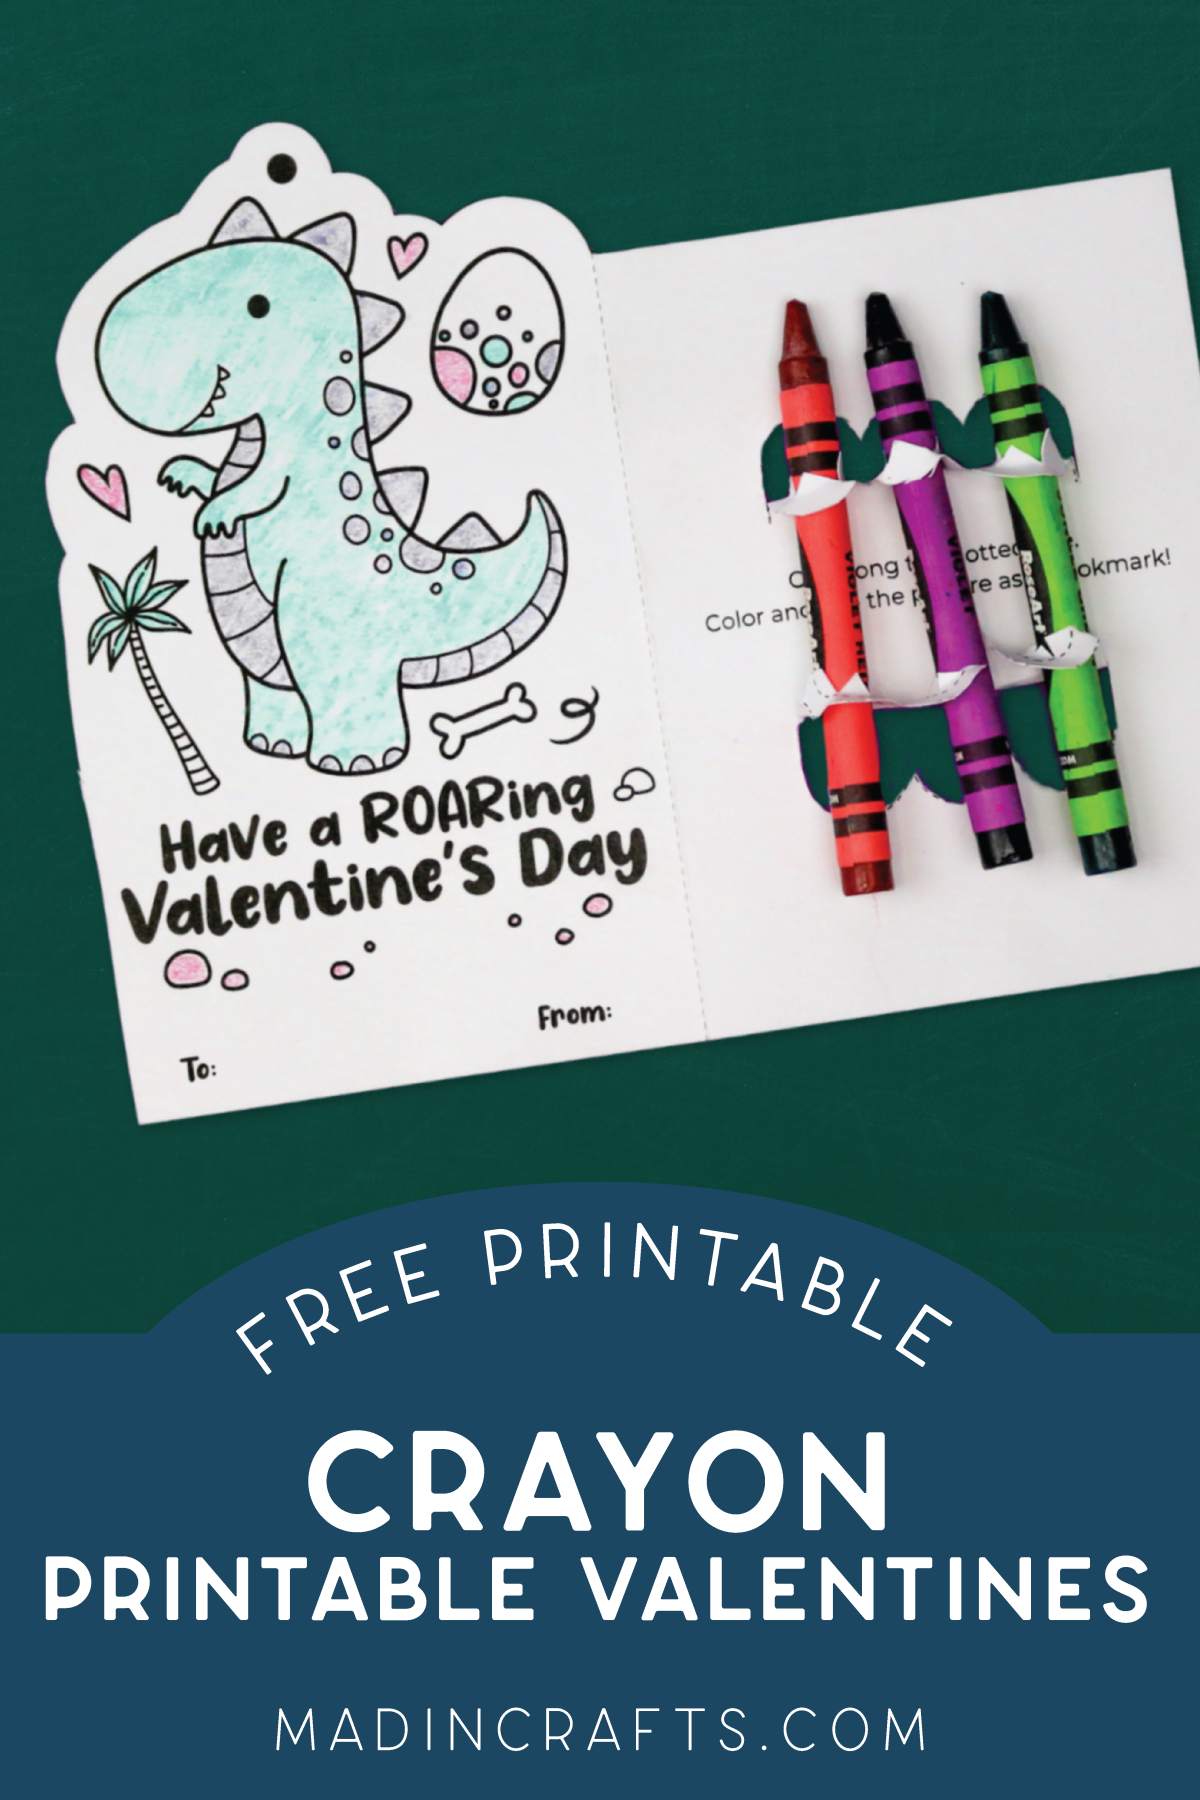 crayon holding dino valentine with crayons